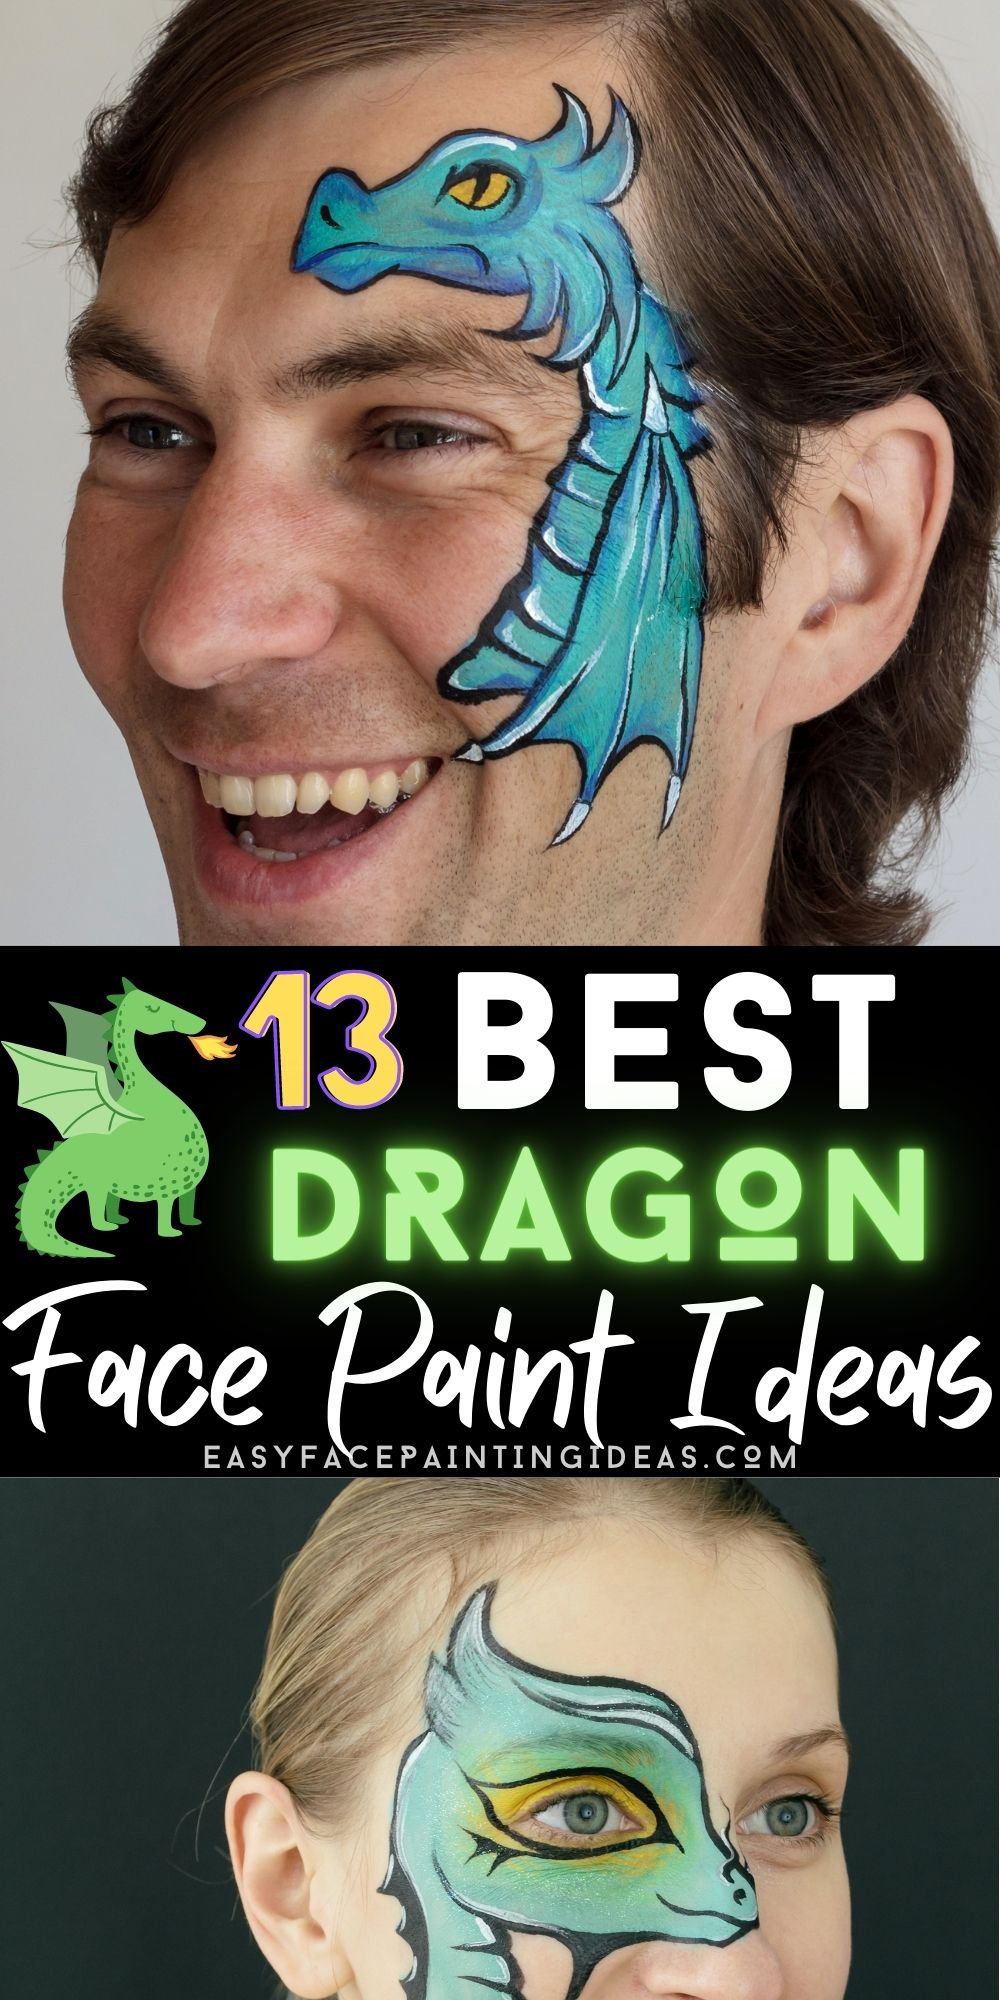 two photos featuring dragon face paint designs